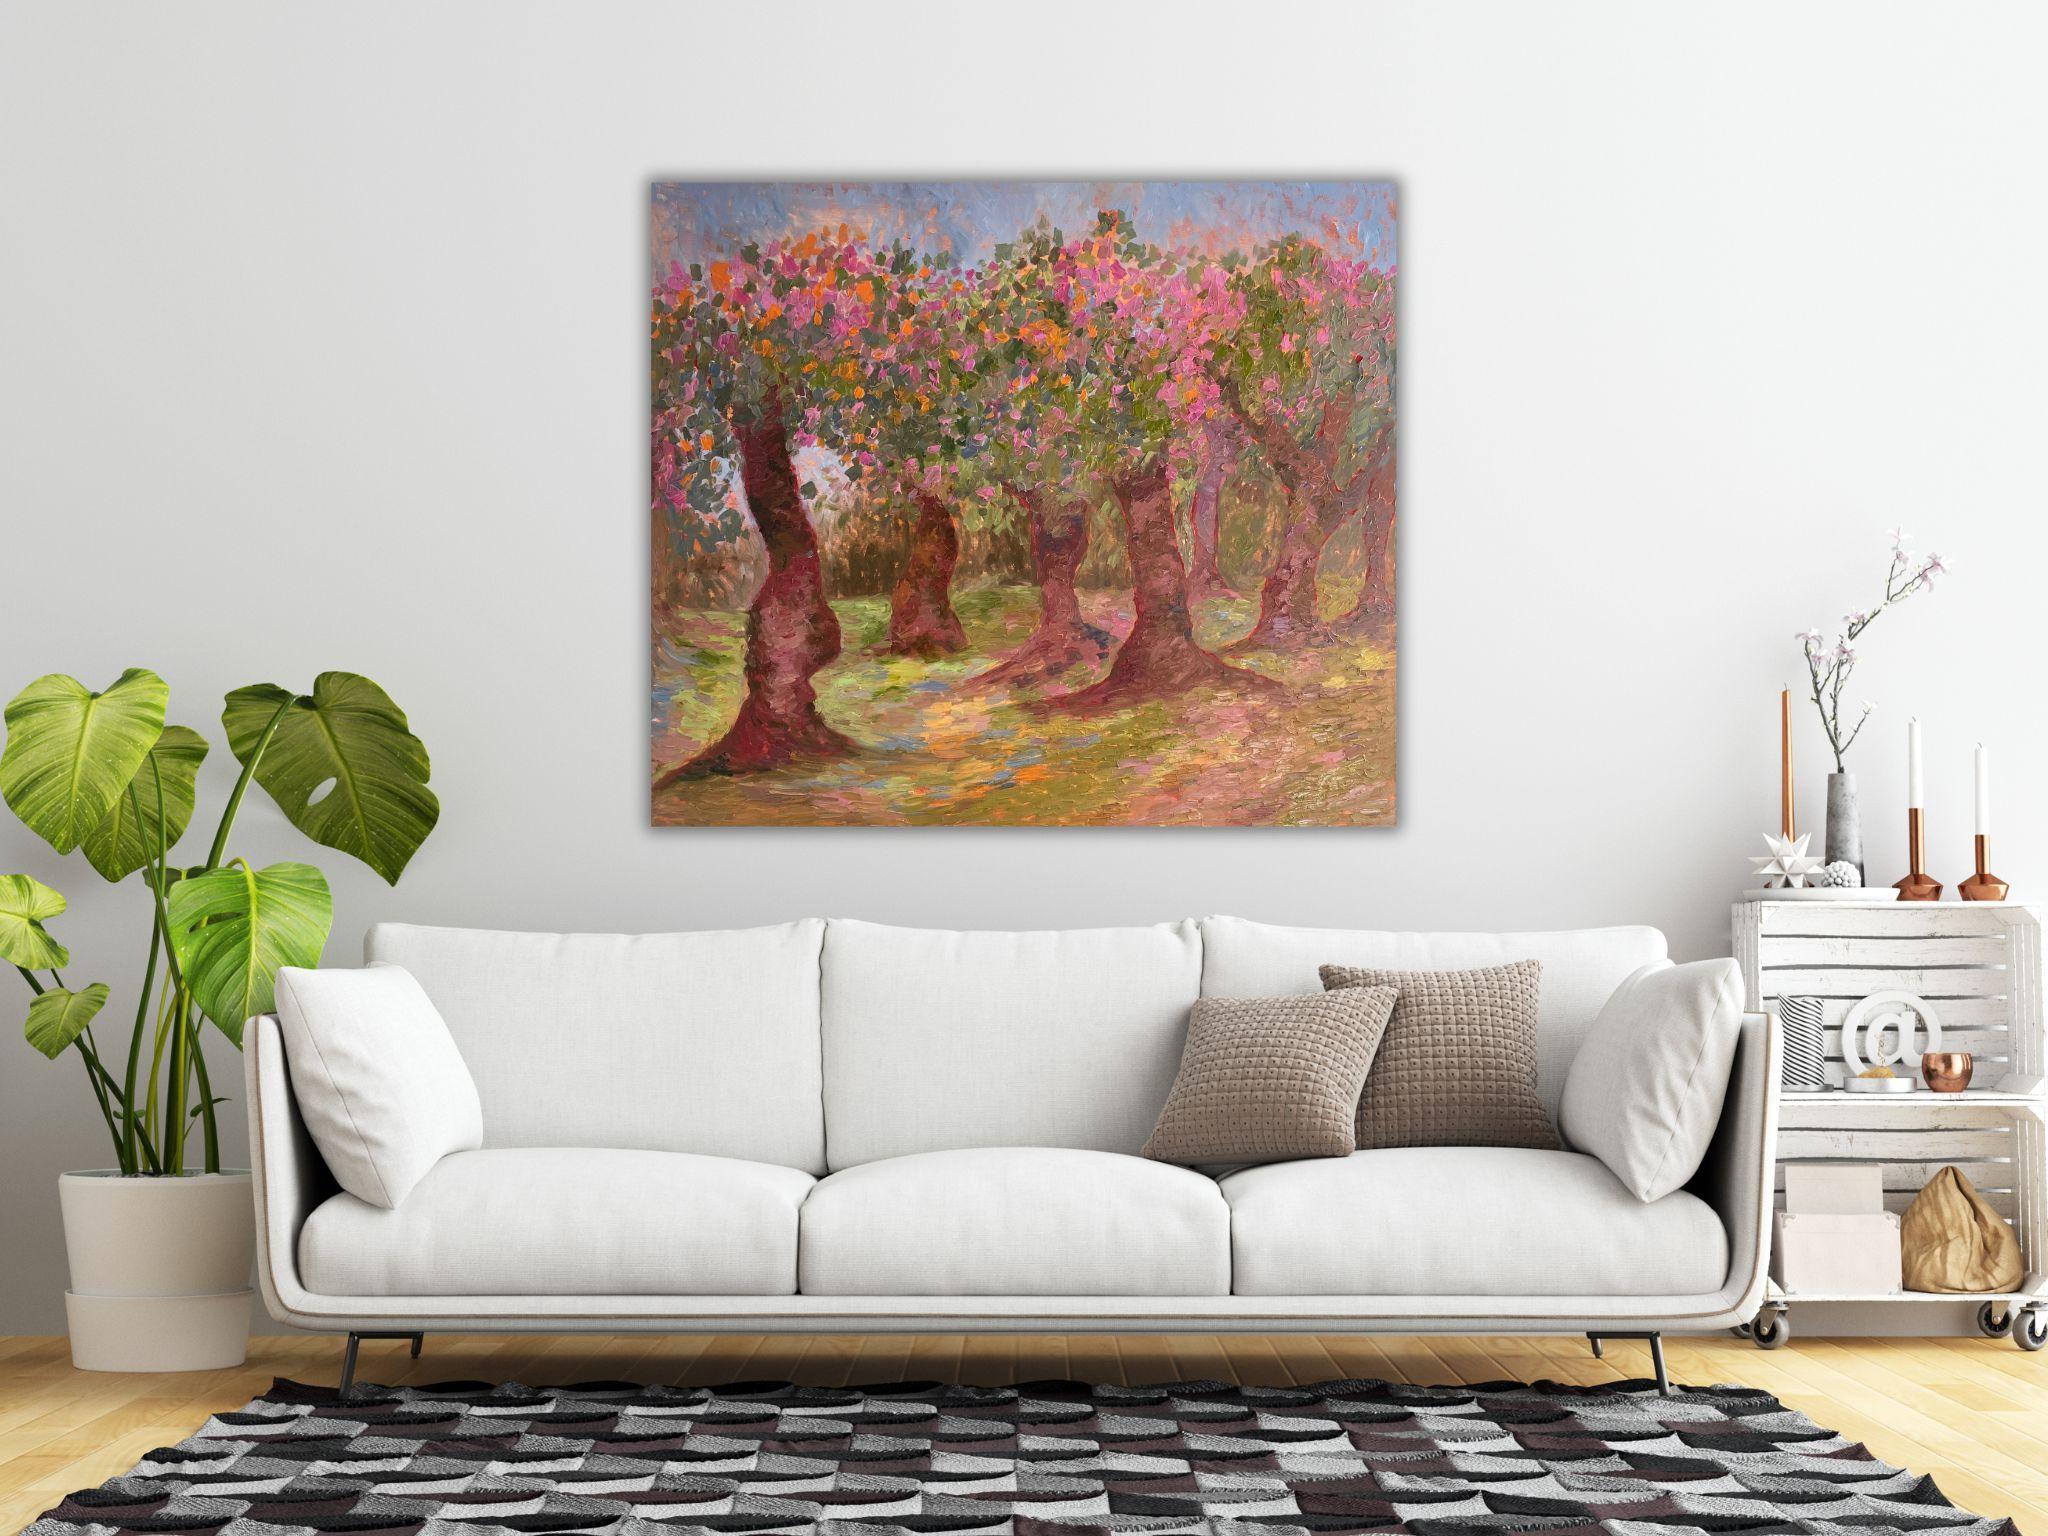 Landscape Painting - APPLES GARDEN, oil on canvas - 40*32 in (100*80cm) For Sale 3